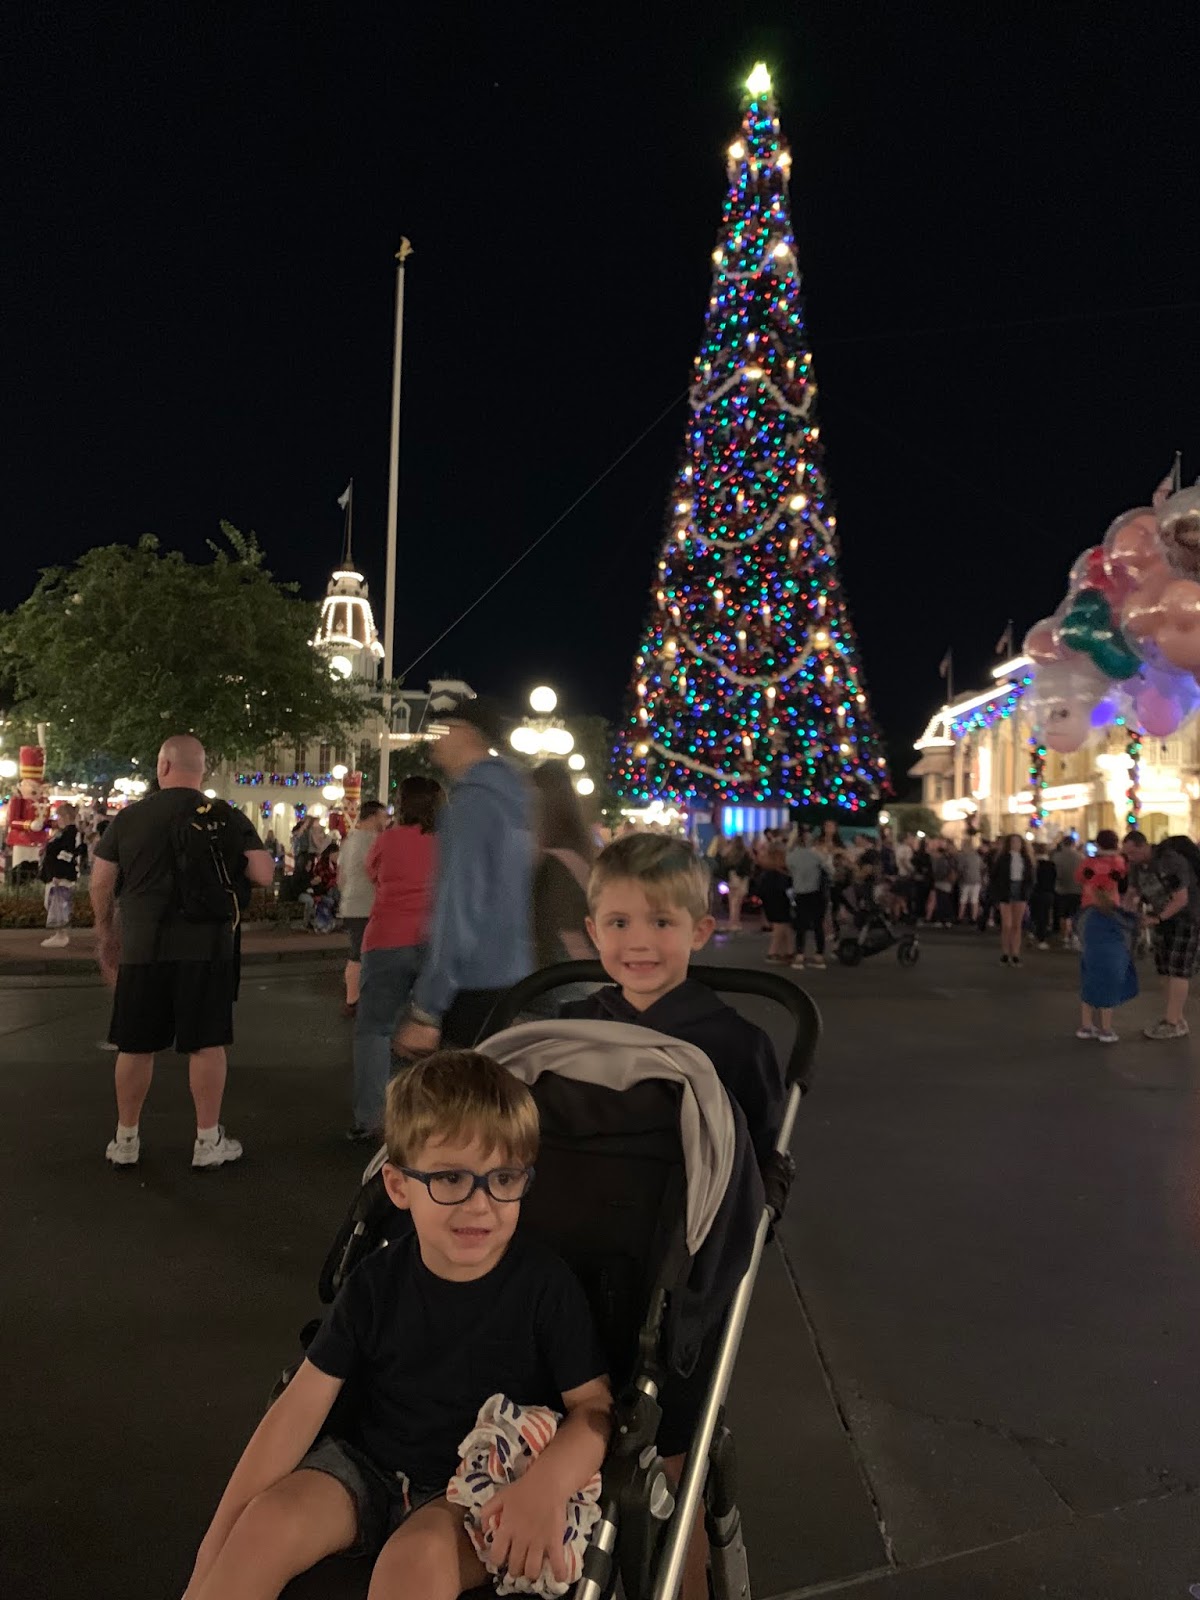 Come see our top five family friendly activities in Florida at Christmas. family friendly activities, gaylord, the flight academy, florida at christmas, holiday, your family, activities in florida, visit santa, laser light show, polar express, best christmas events, best christmas activities, best christmas ever, best family christmas, 